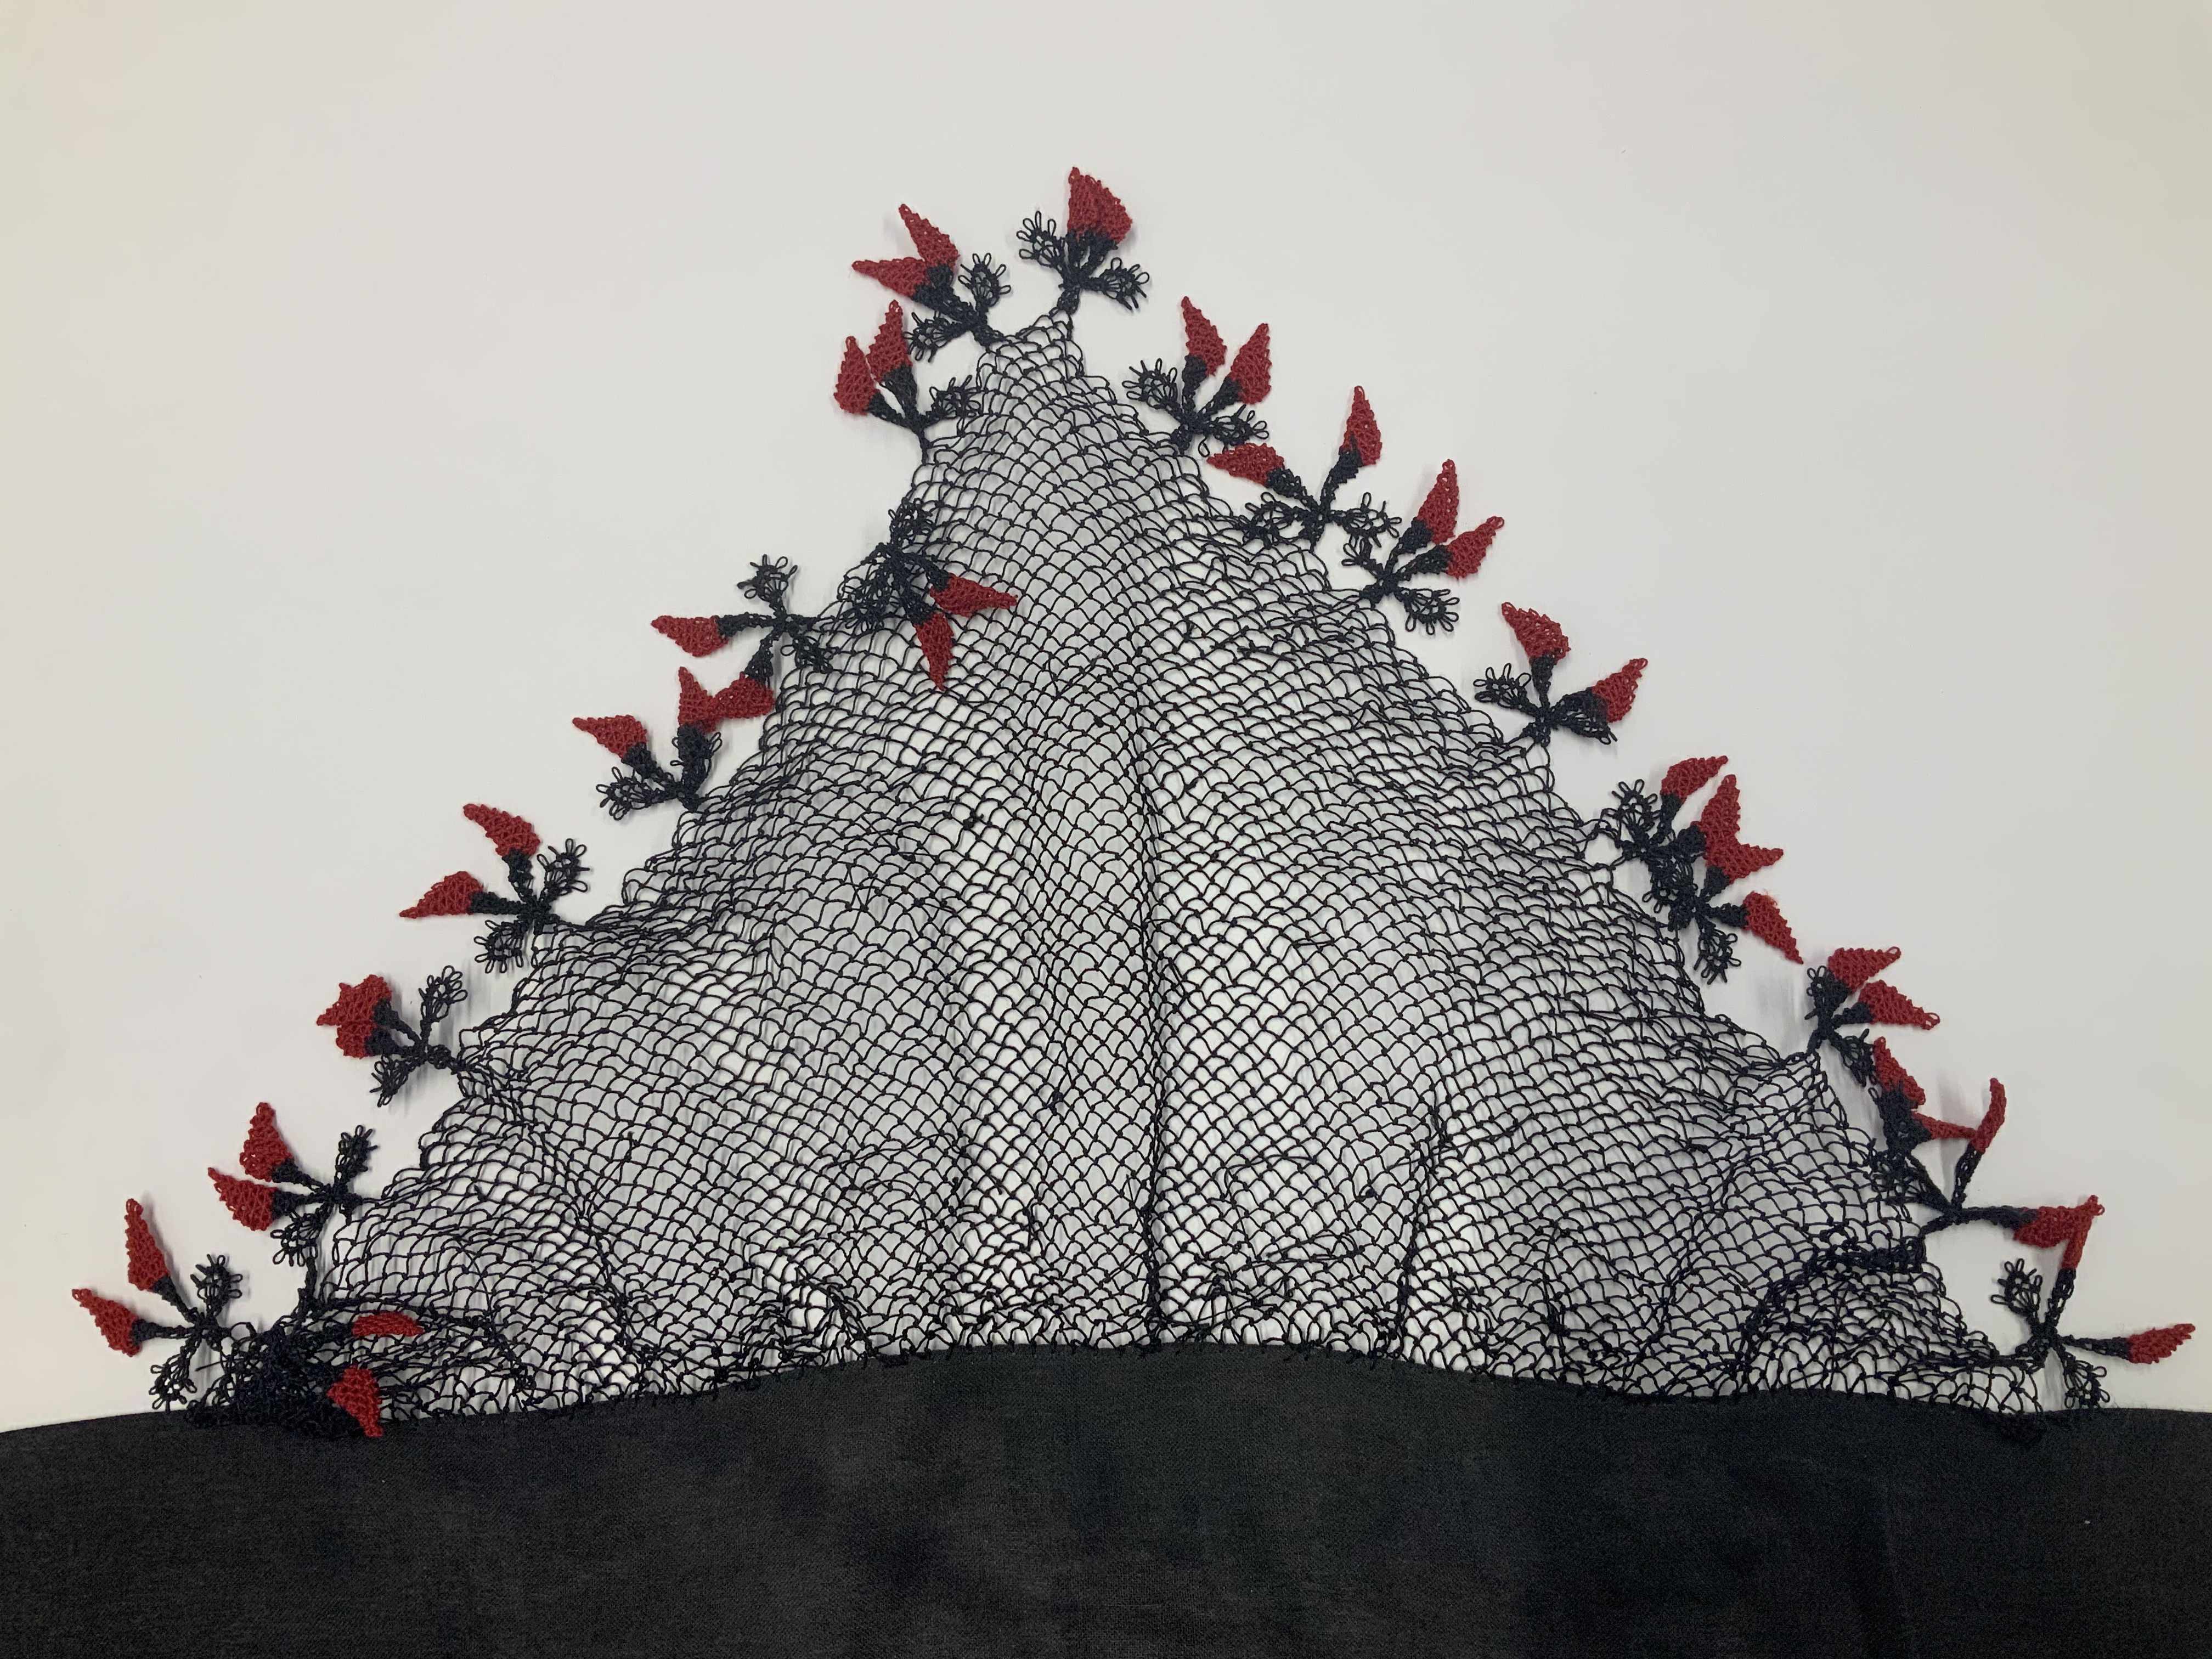 A triangular oya needle lace with black netting and red pepper style decorative embroidery details adorning the outer edges